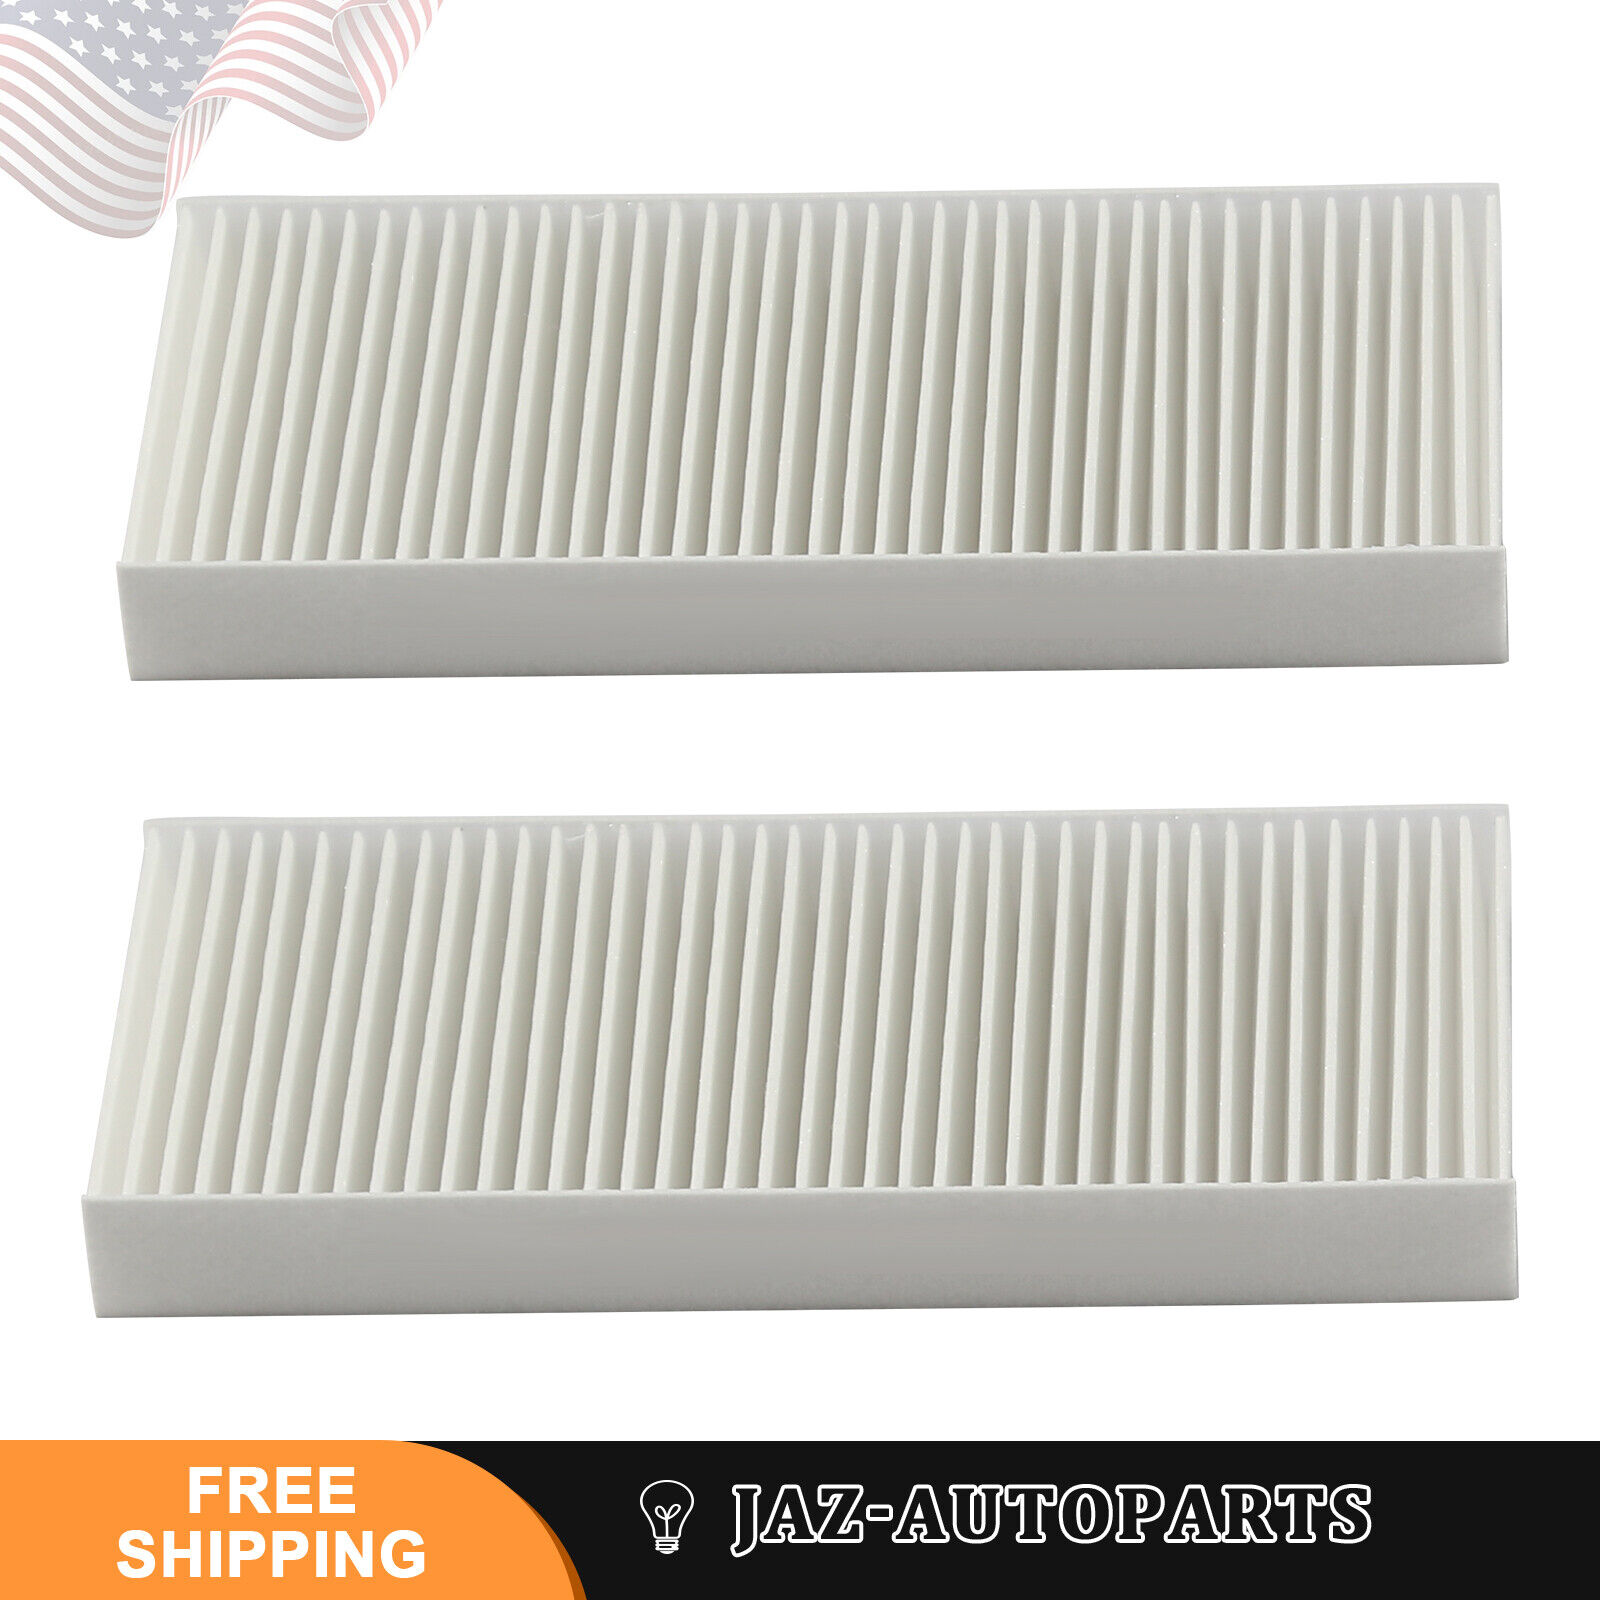 Cabin Air Filter For 04 -13 Nissan Armada Titan 5.6L V8 Replacement #999M1-VP005